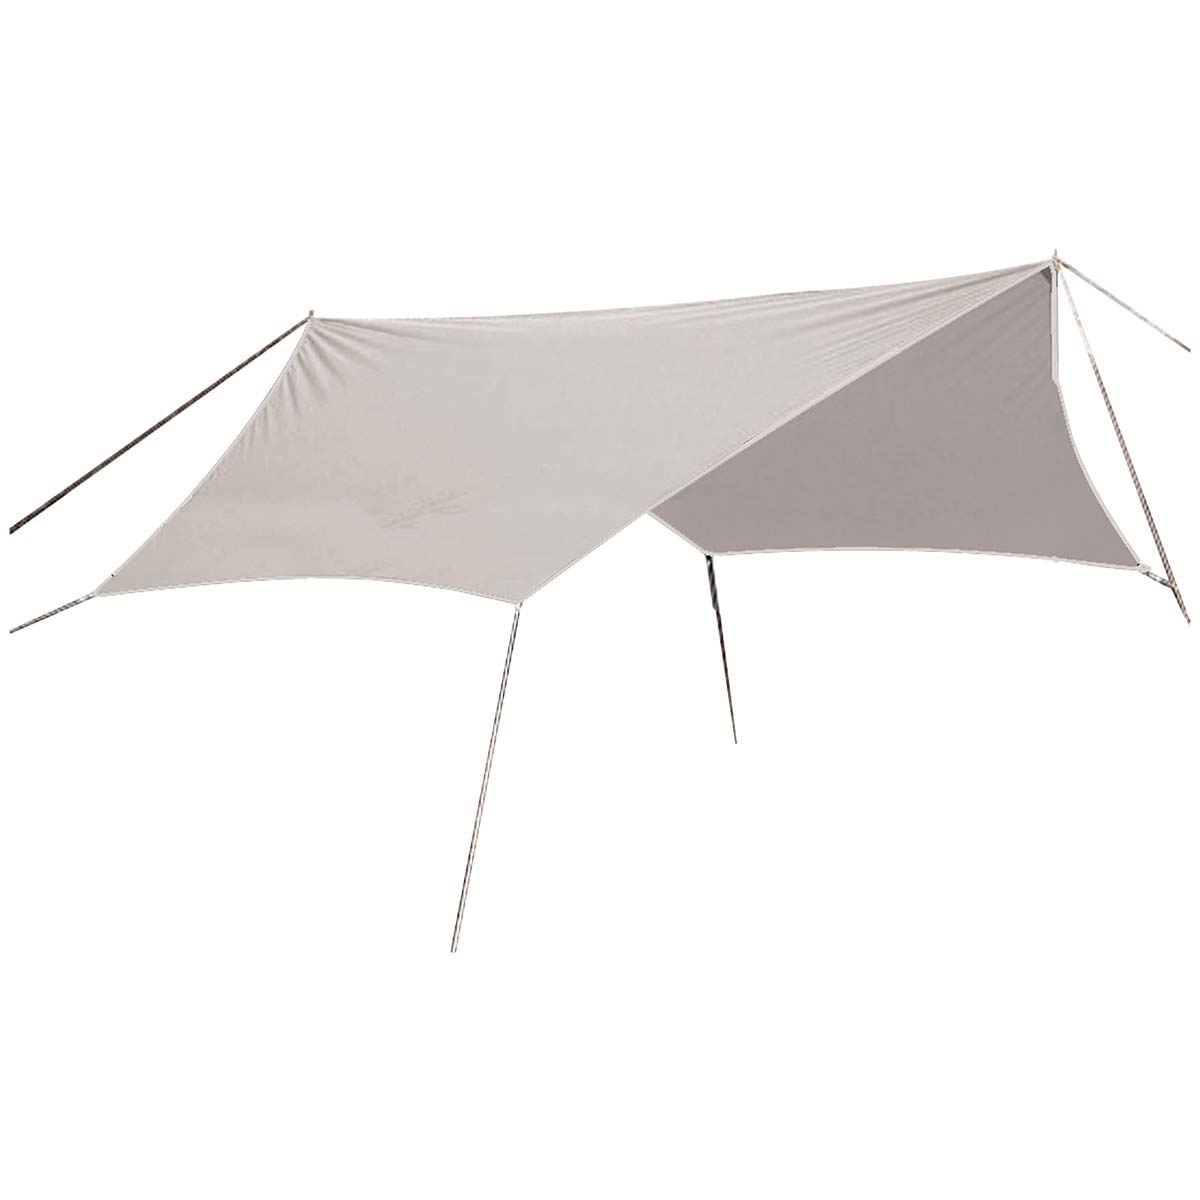 4471496 A beige hexagonal tarp from the Urban Outdoor collection. Quickly and easily creates a shelter and shaded area. This tarp is waterproof due to the polyester-cotton fabric with UV + PU coating and a water column of 2000 mm. Easy to hang at the desired location with the included guy lines and pegs. The width of the tarp ranges from 2.4 meters to 4 meters, and the total length is 4.4 meters. Includes a convenient carrying bag (excluding tarp poles).